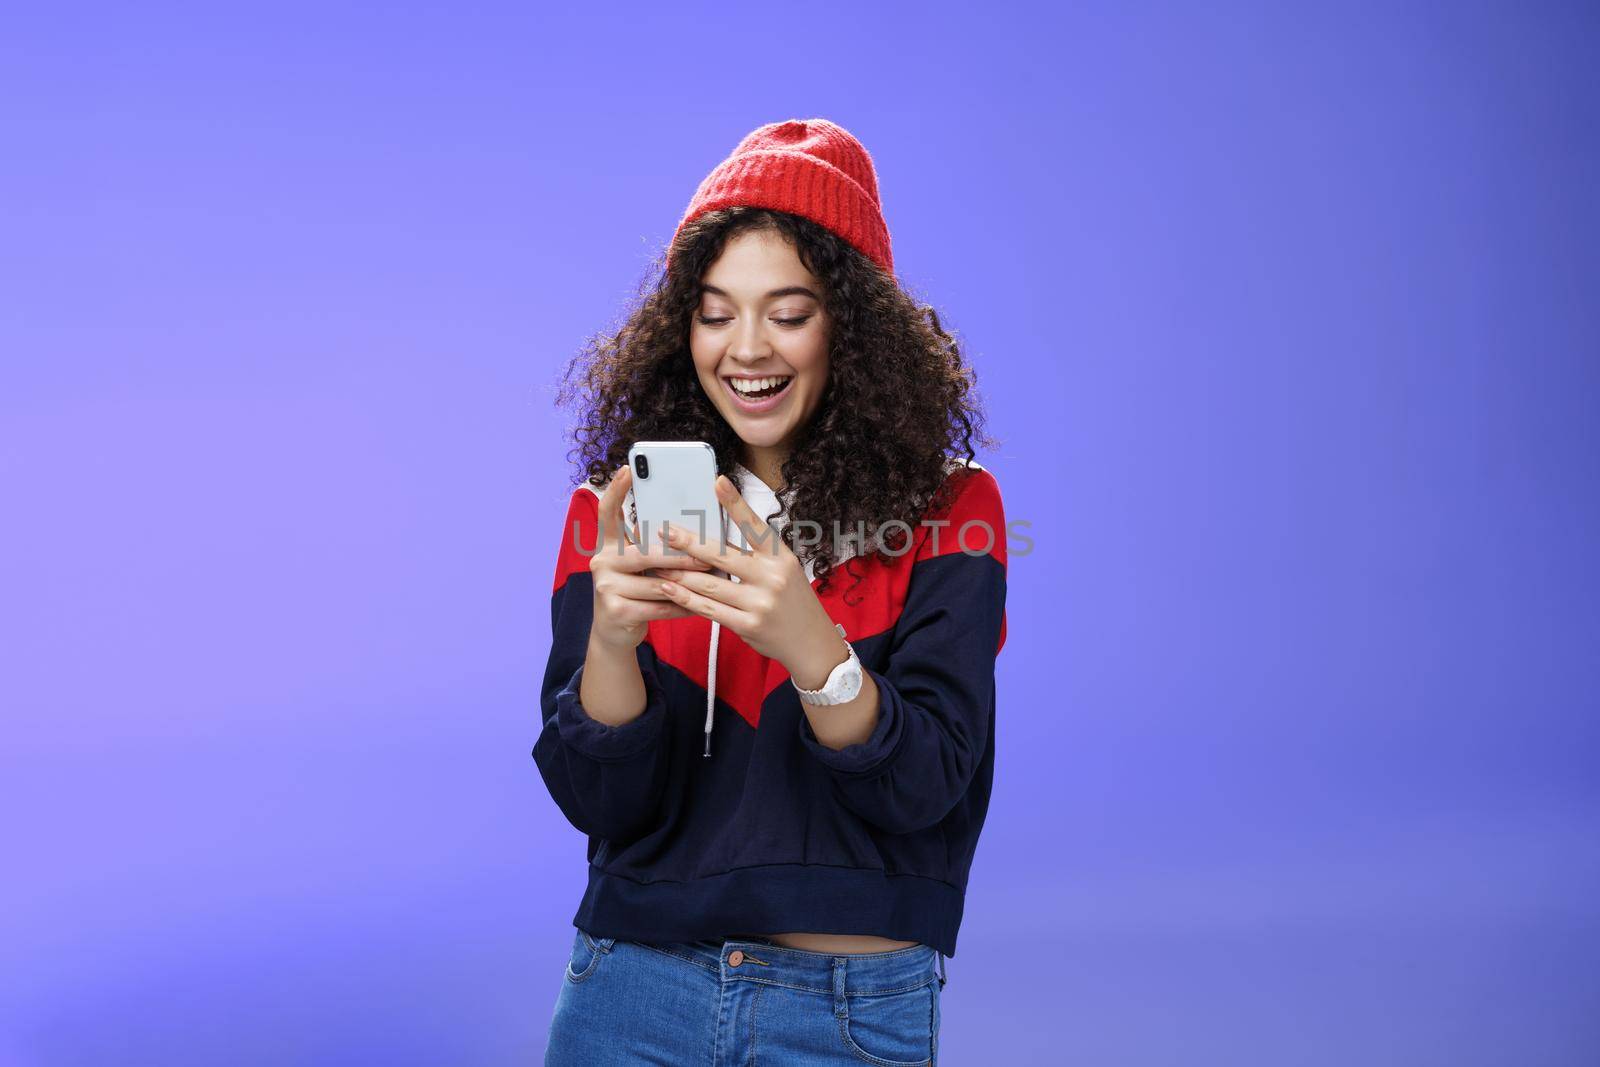 Lifestyle. Joyful and sociable stylish caucasian woman with curls in warm beanie having fun laughing and chuckling as using smartphone typing funny message looking at mobile phone screen happily over blue wall.